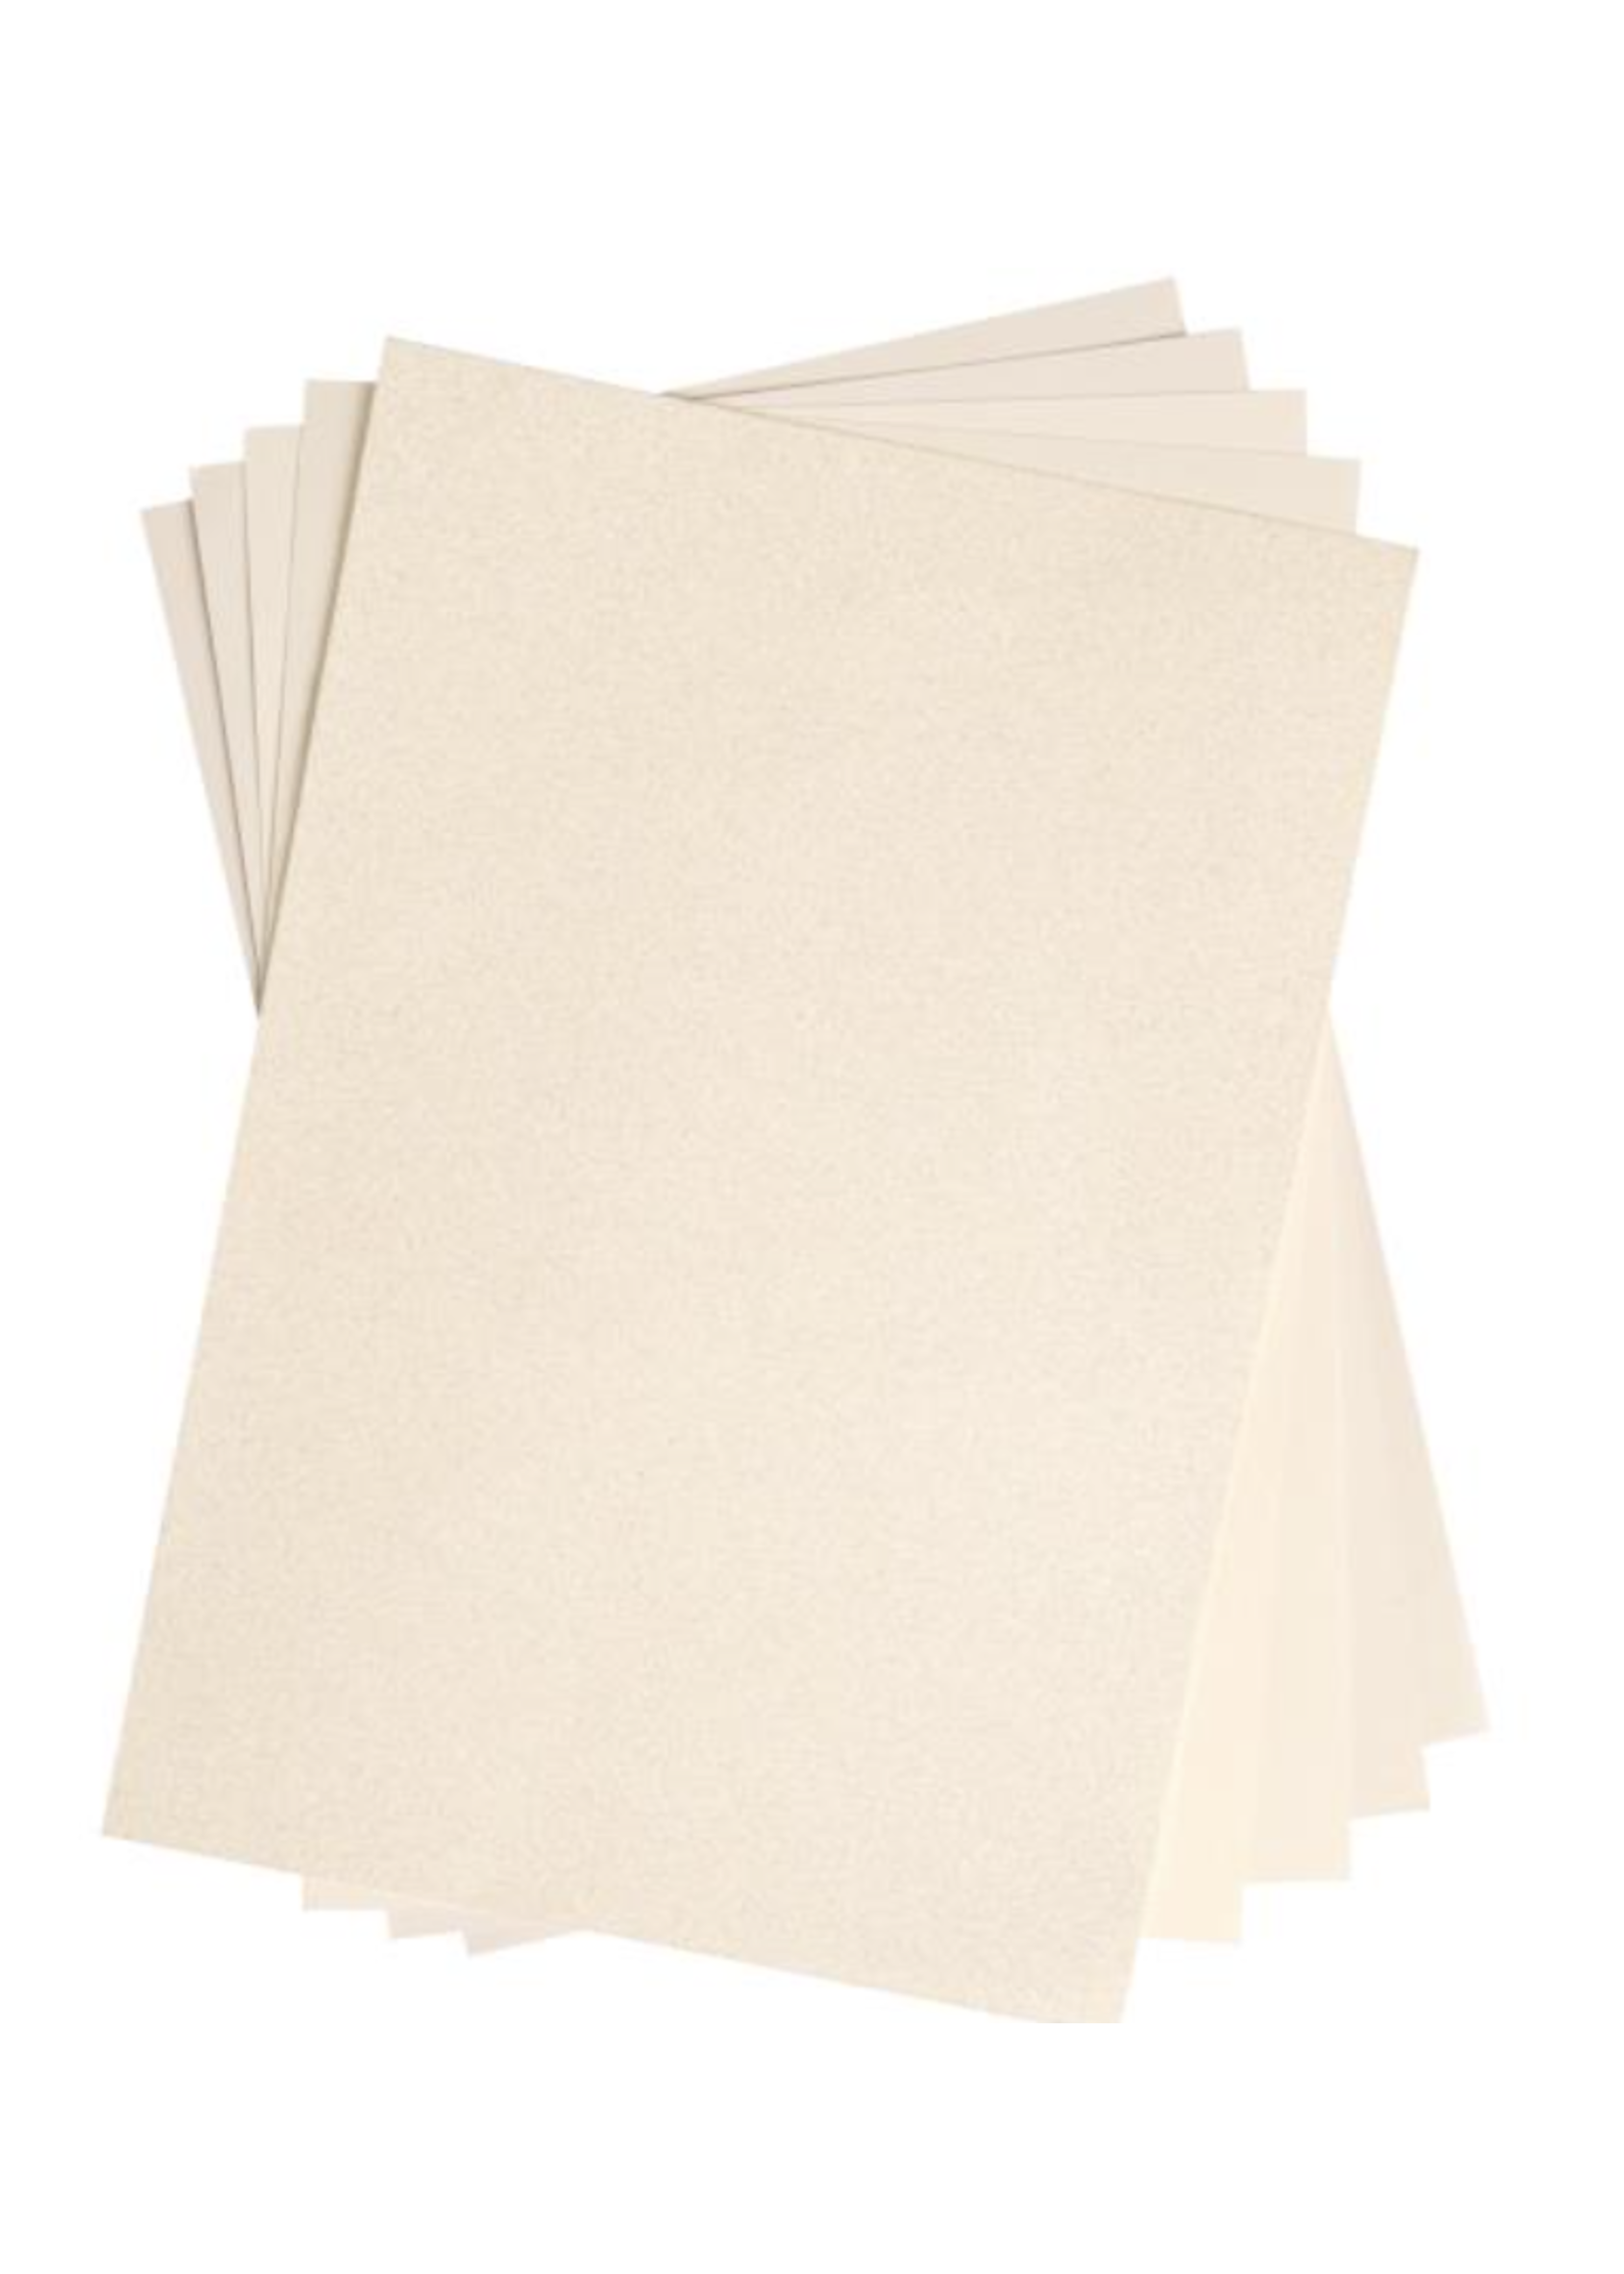 Sizzix Opulent Cardstock Pack: Ivory